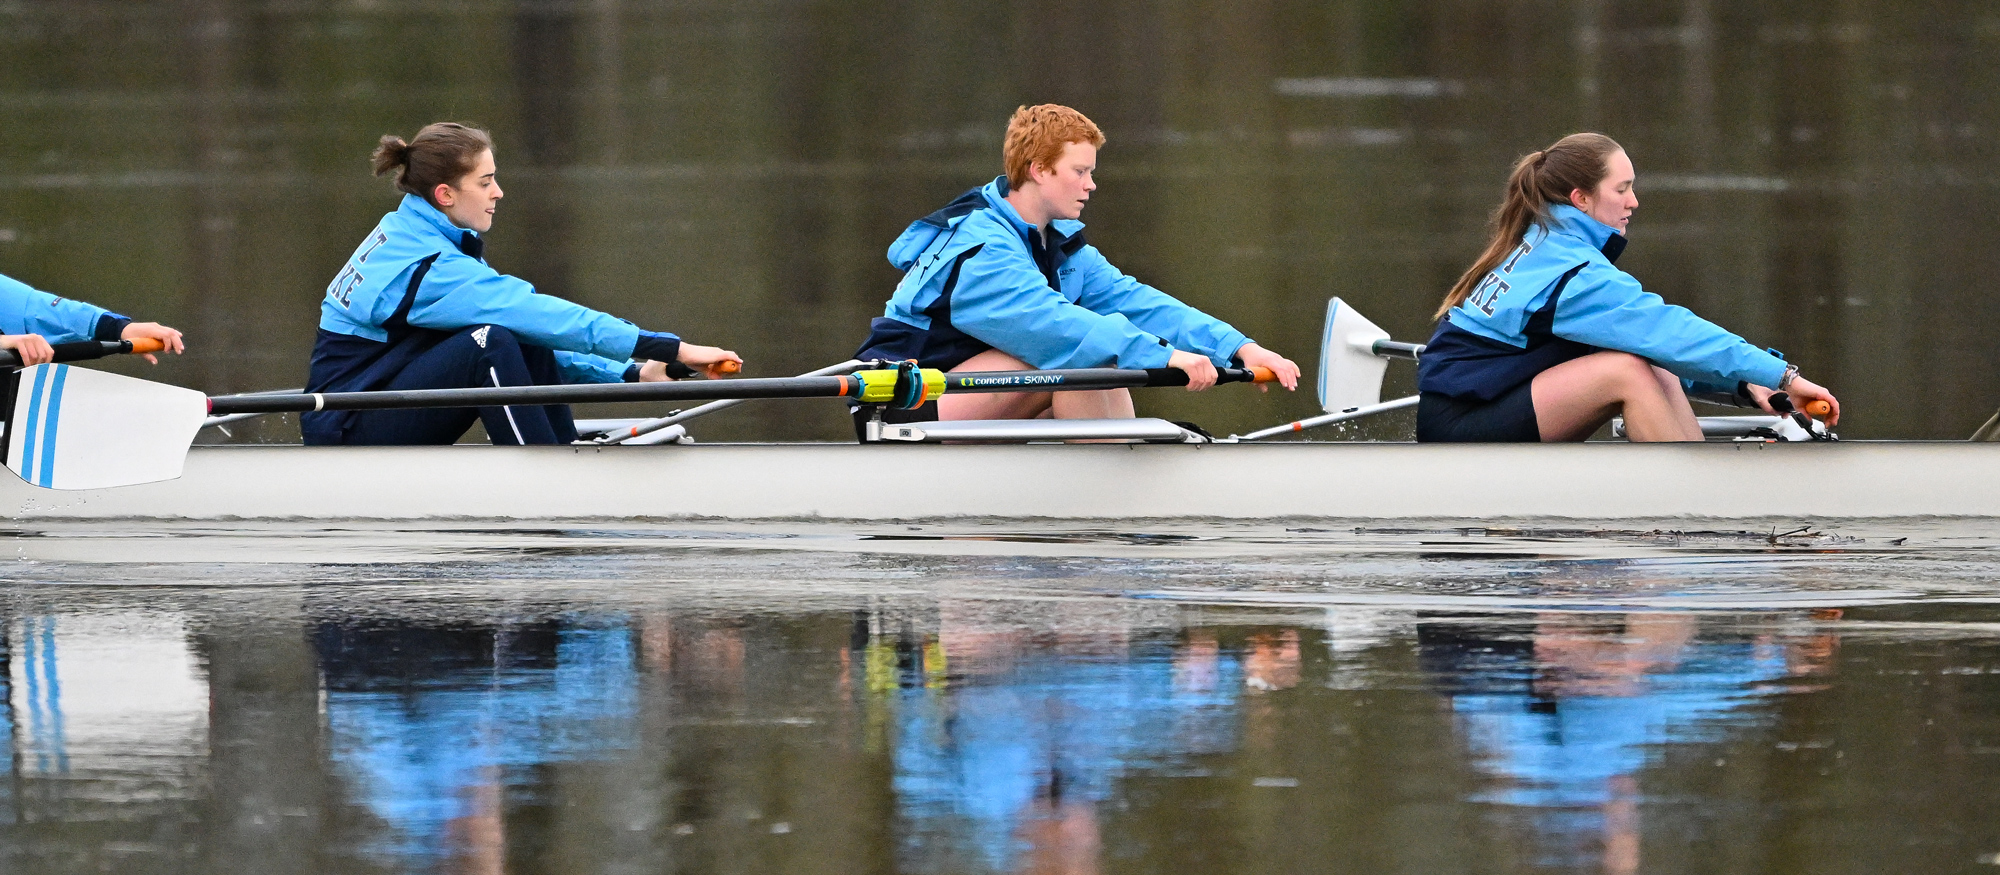 The Mount Holyoke first varsity eight placed 14th out of 25 boats in the Women's Open 8+ division at the Head of the Riverfront in Hartford, Conn., on Oct. 1, 2023. (RJB Sports file photo)